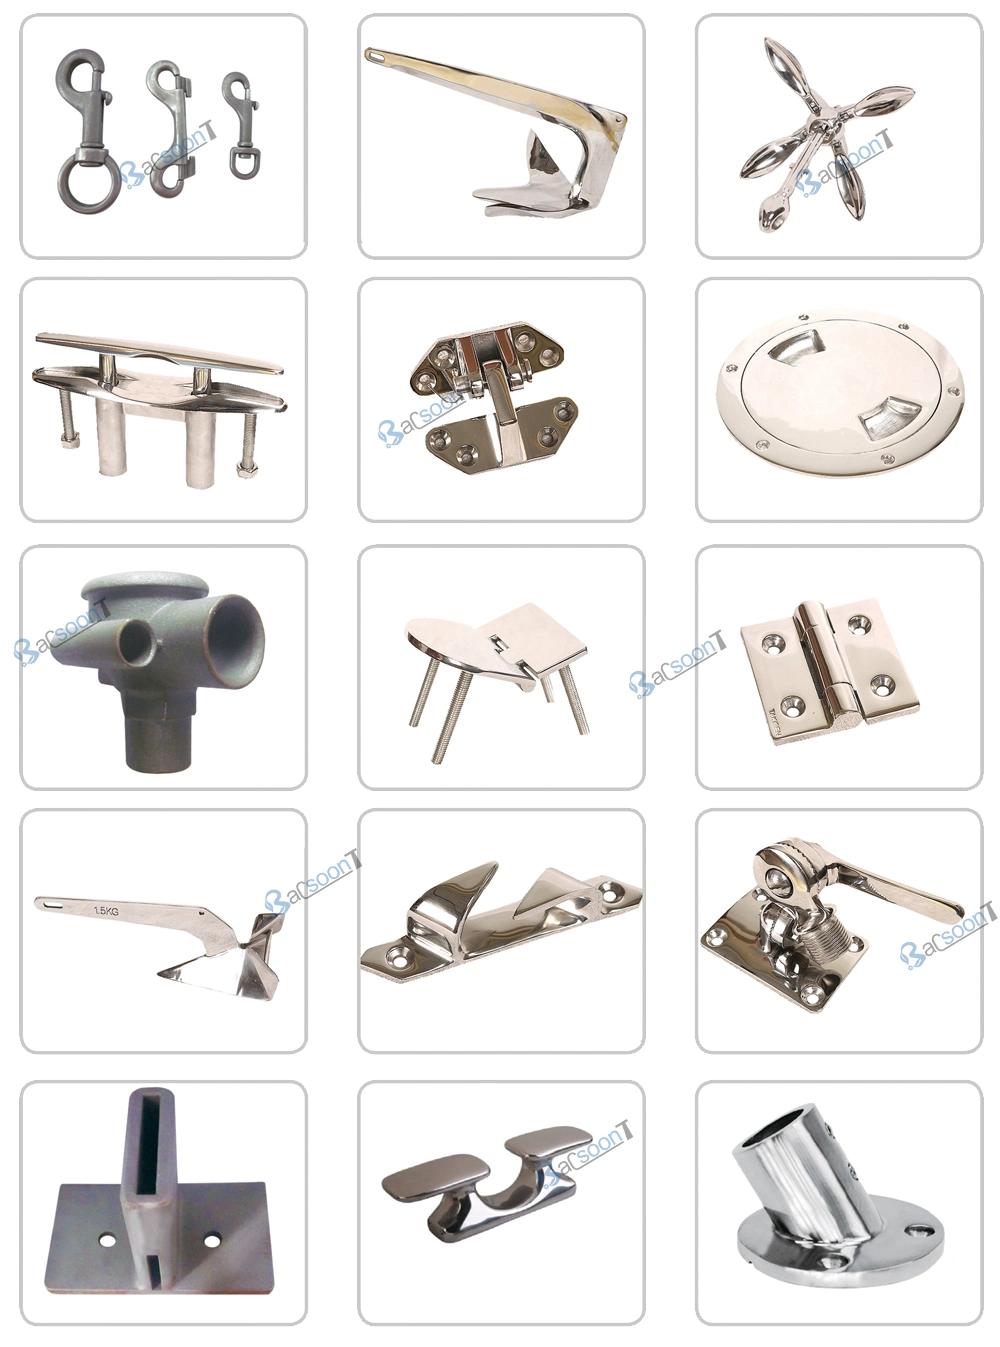 Stainless Steel/Carbon Steel/Steel Lost Wax Casting/Investment Casting/Precision Casting Impeller/Steel Part